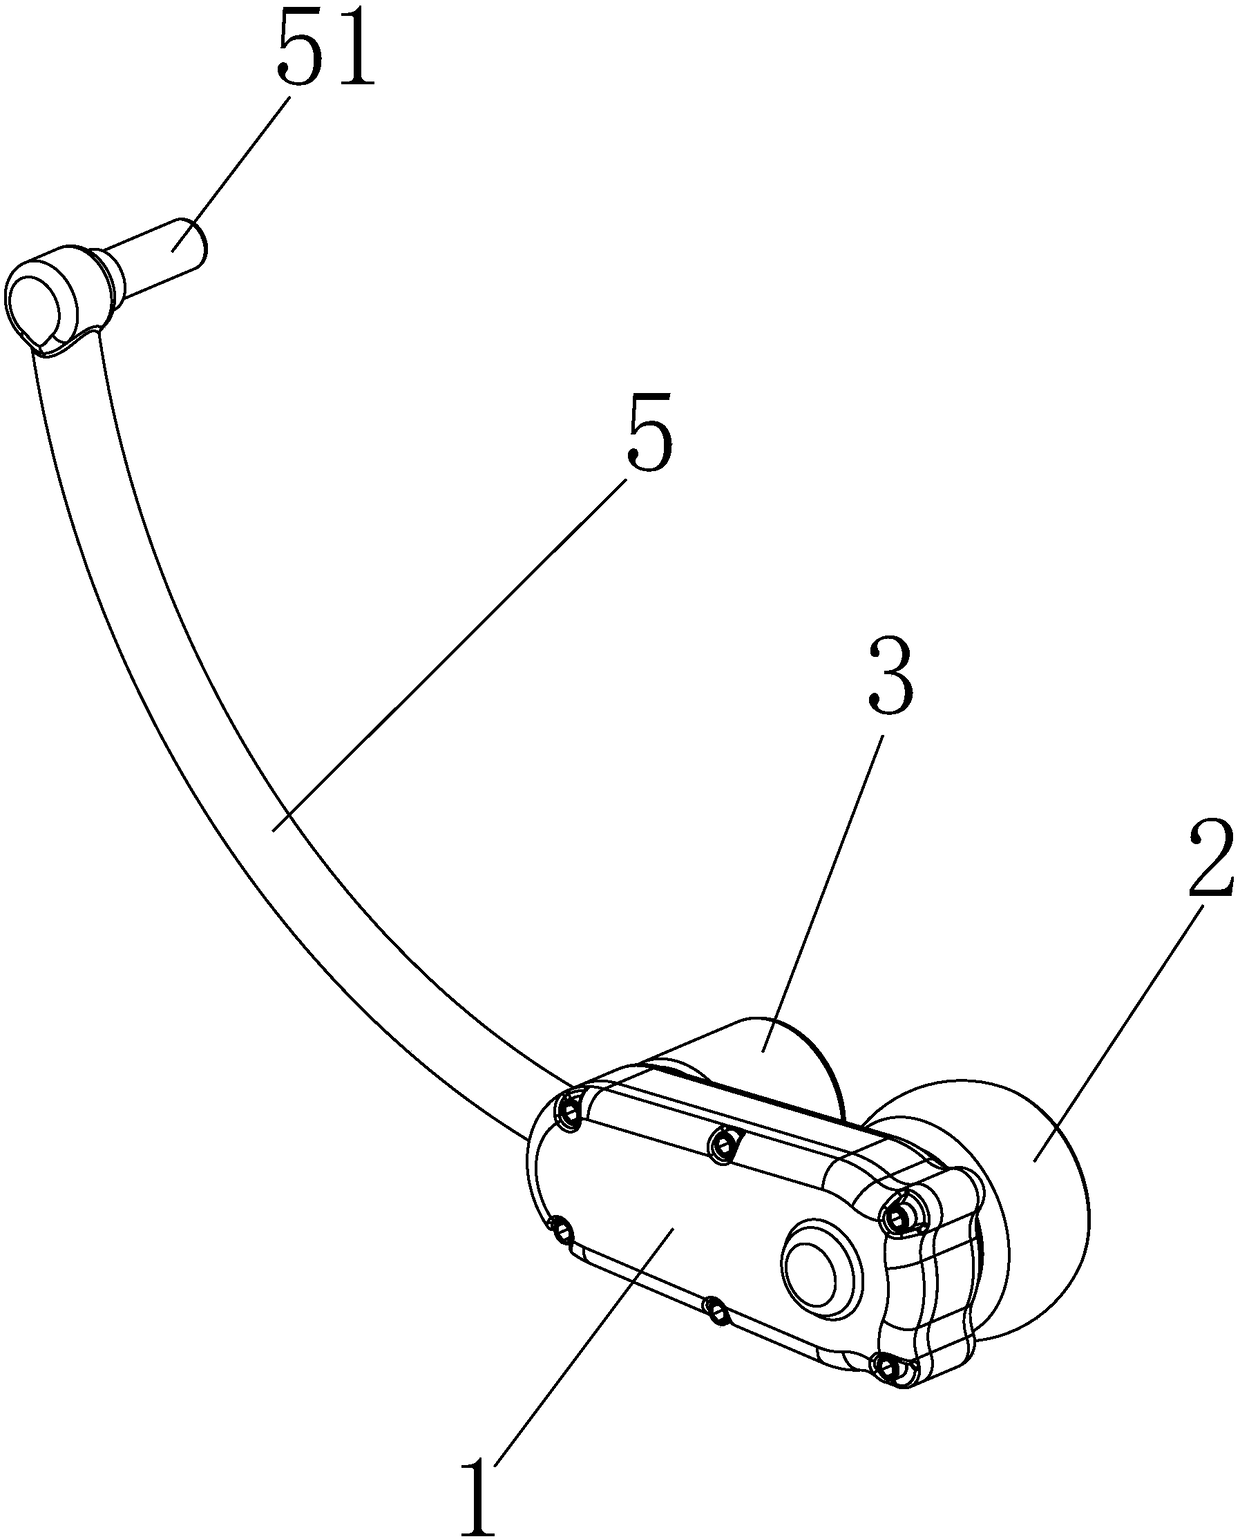 Single-wheel type bicycle speed reduction device